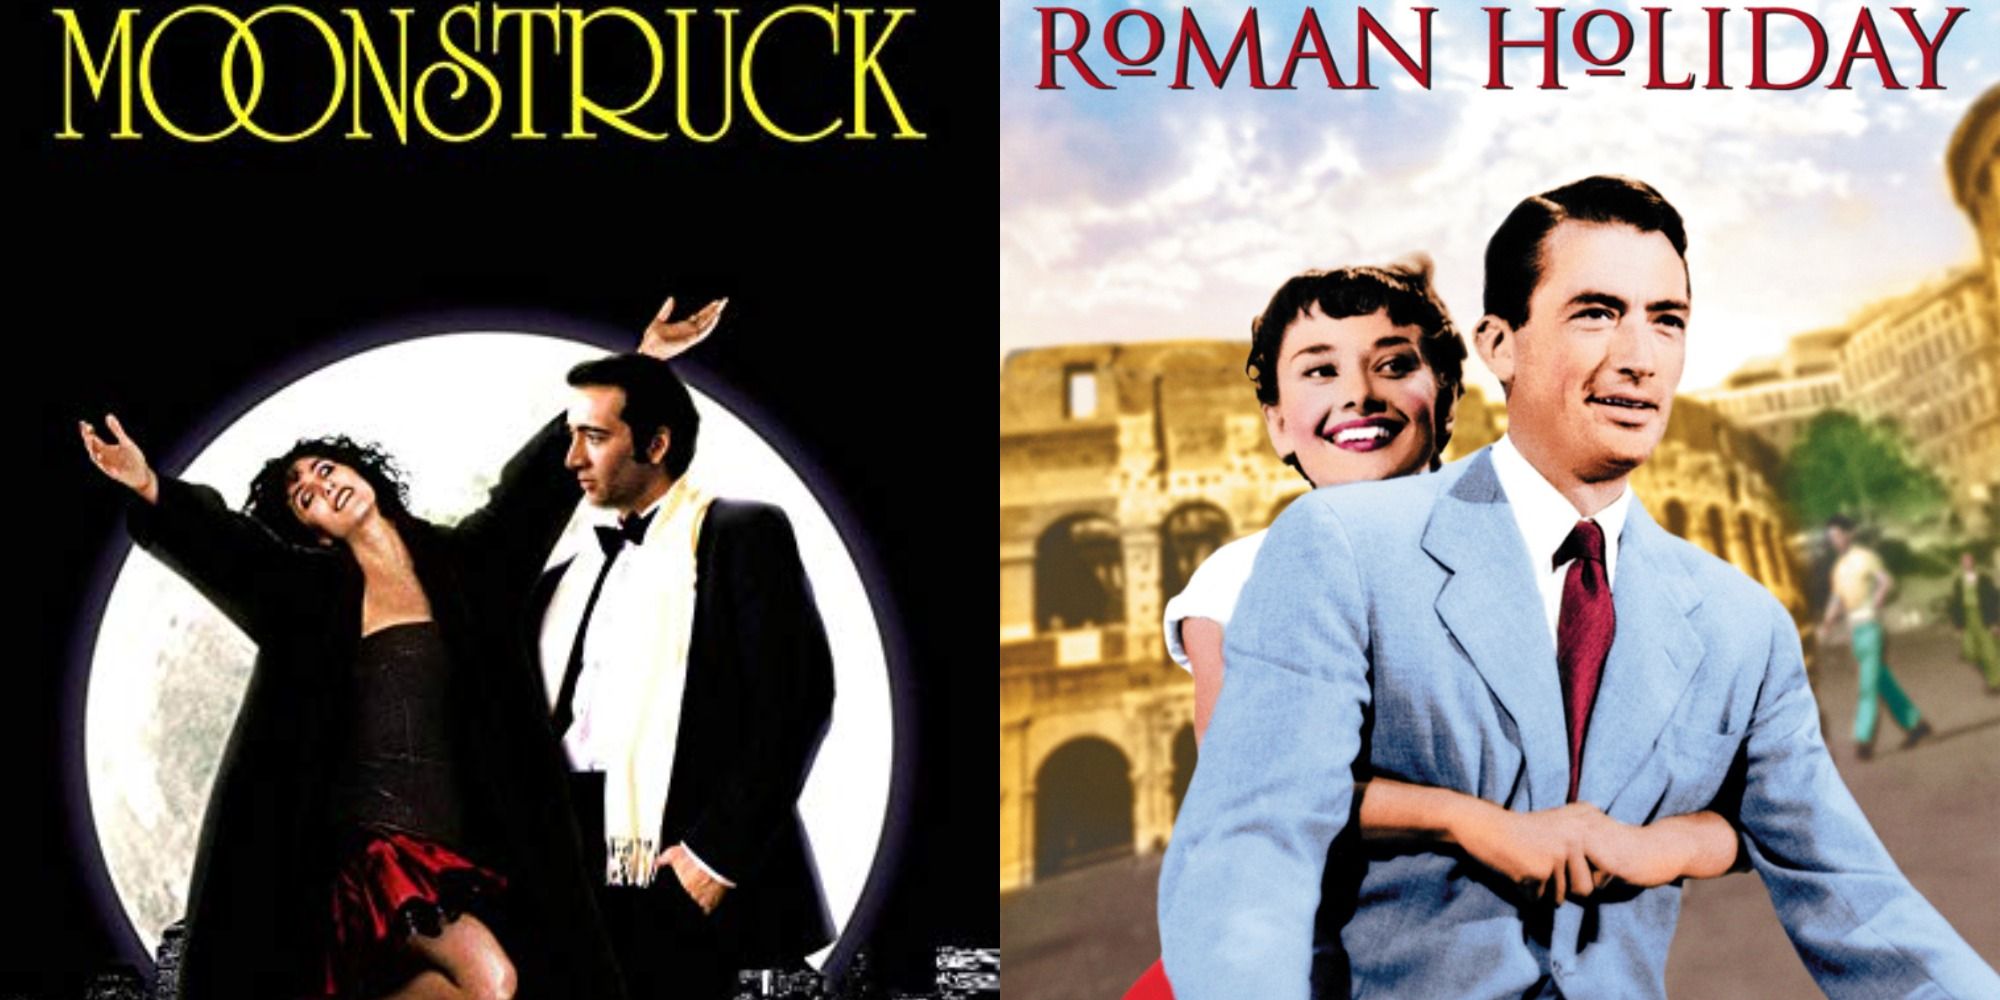 Split image showing the posters for Moonstruck and Roman Holiday